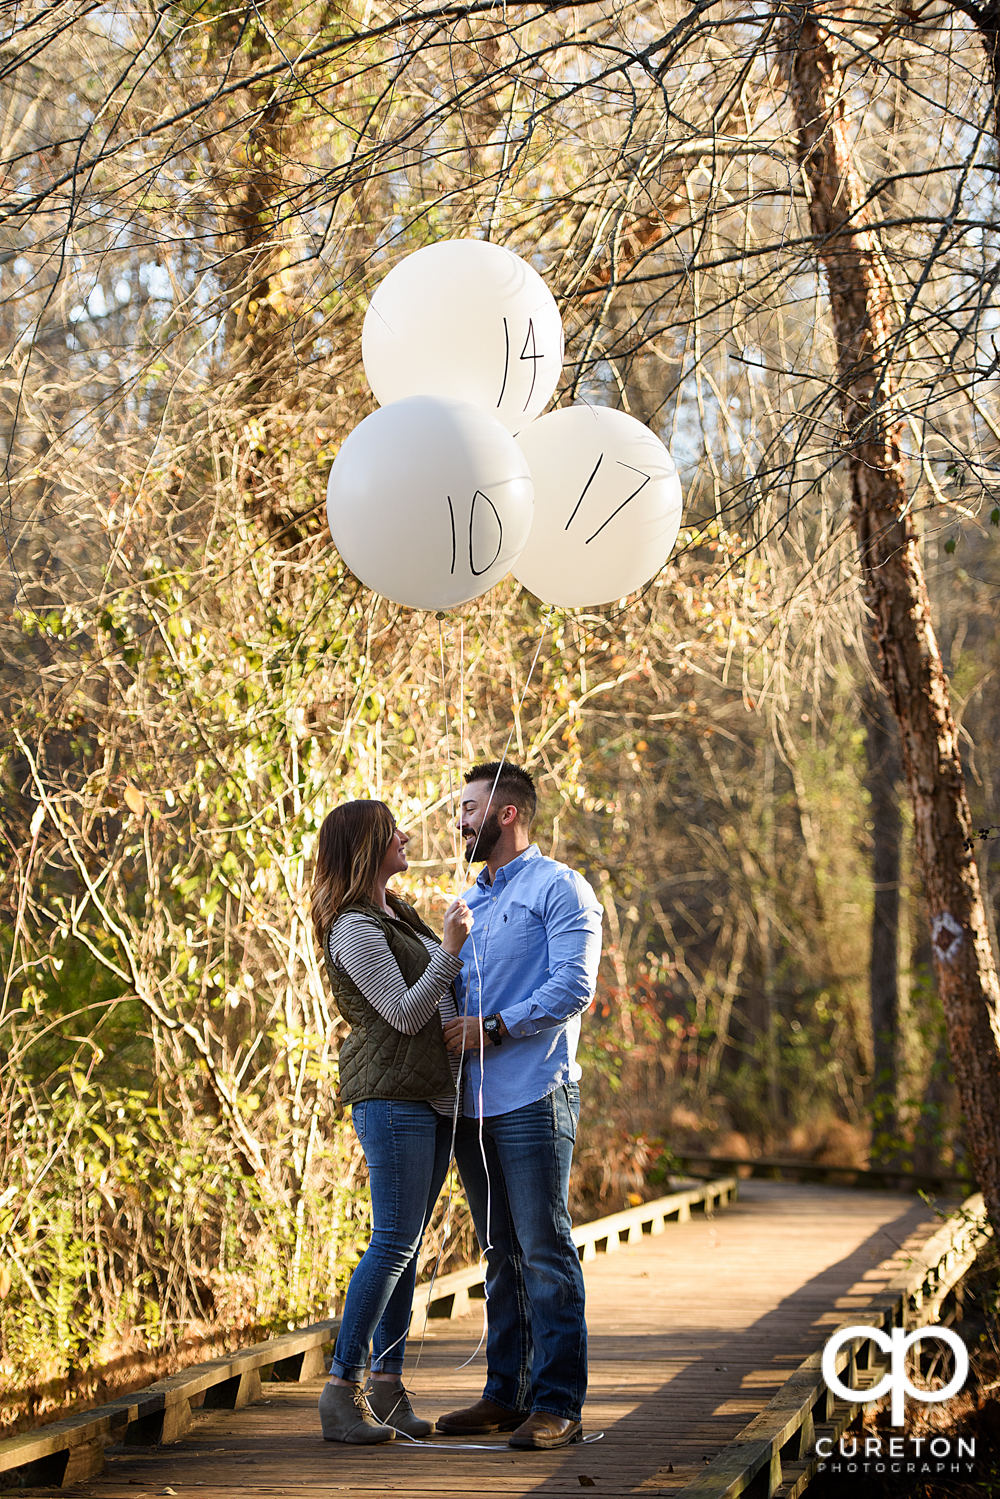 Engaged couple holding balloons with their wedding date on them.